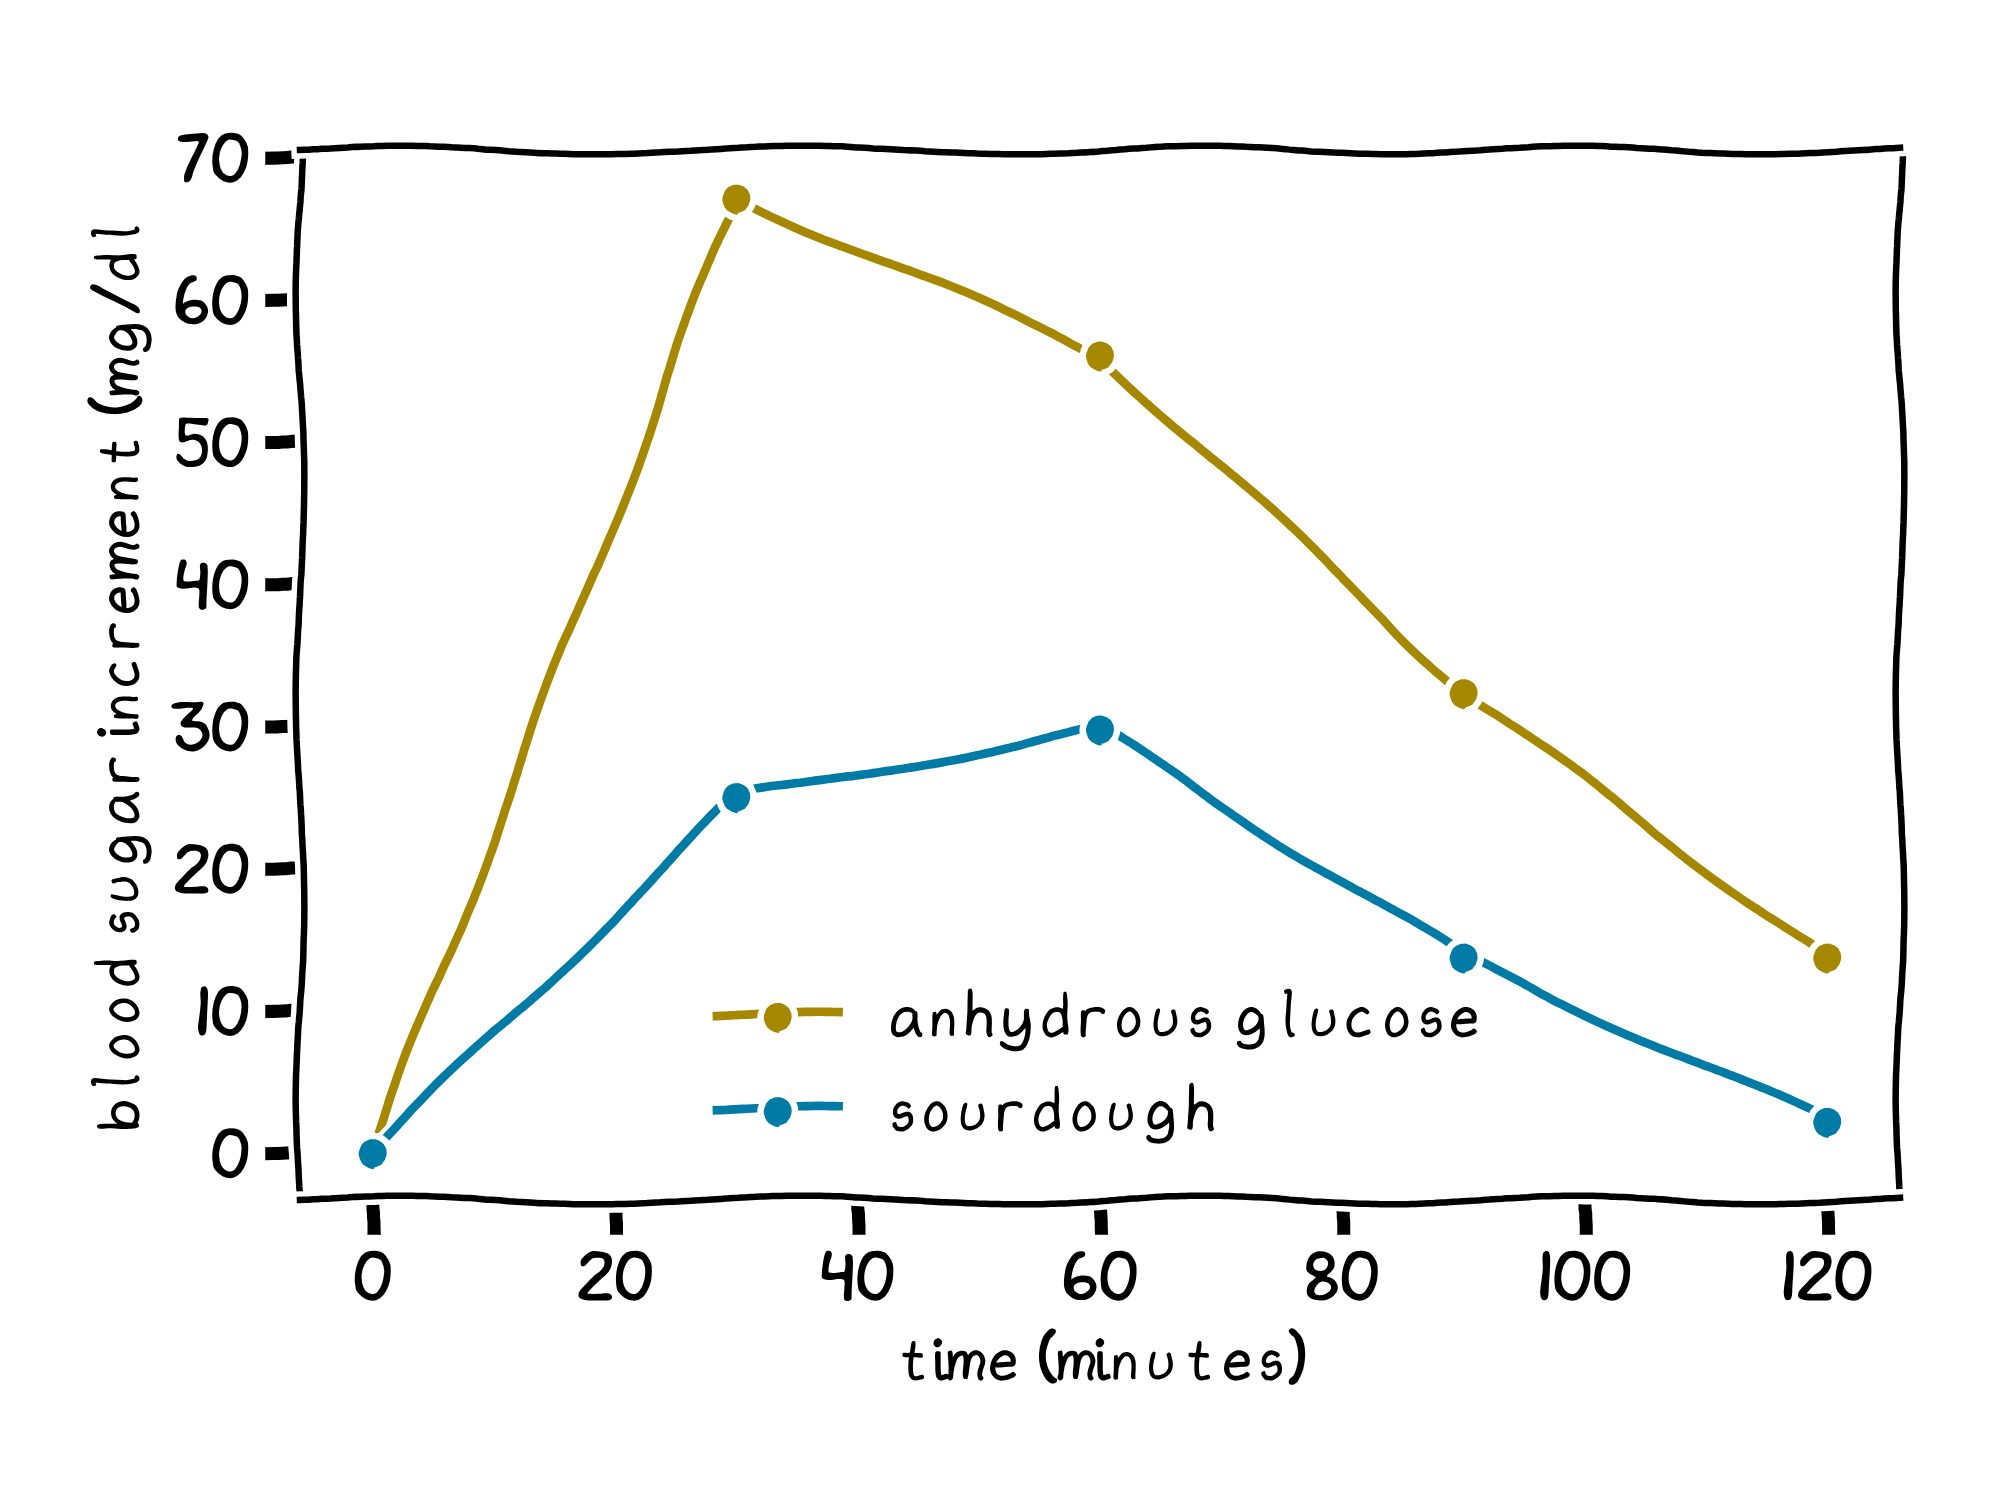 Measurement of the GI of a bread sample.  The two lines in this chart show the increase in blood sugar over time after ingesting glucose (yellow-brown line) and sourdough bread (blue line).  The blood sugar spike for sourdough is approximately 41% the size of that for glucose, indicating that the sourdough has a GI of 41.  This is a significantly lower GI than for a standard wheat bread.